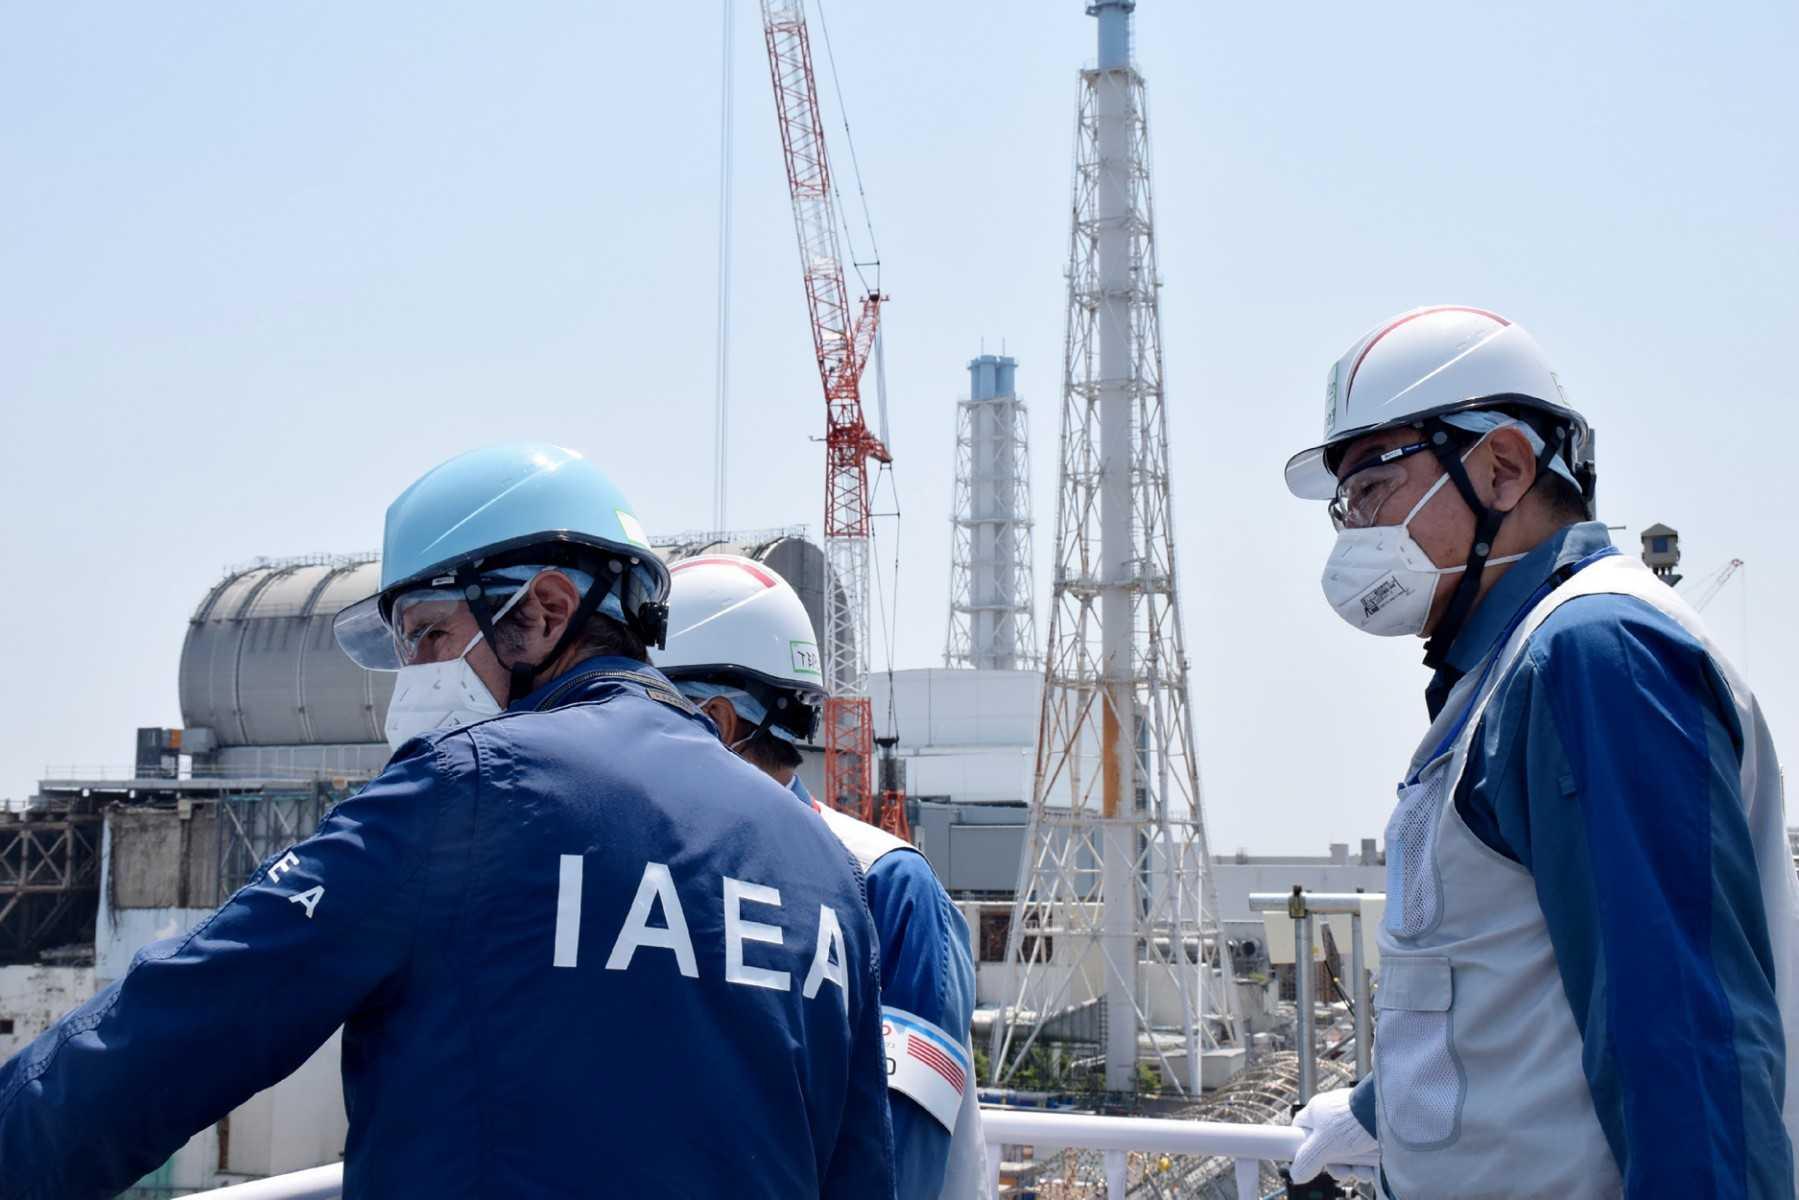 Director-general of the International Atomic Energy Agency, Rafael Grossi (left), visits the Tokyo Electric Power Company Holdings Fukushima Daiichi nuclear power plant in Okuma, Fukushima prefecture, on May 19, 2022. Photo: AFP